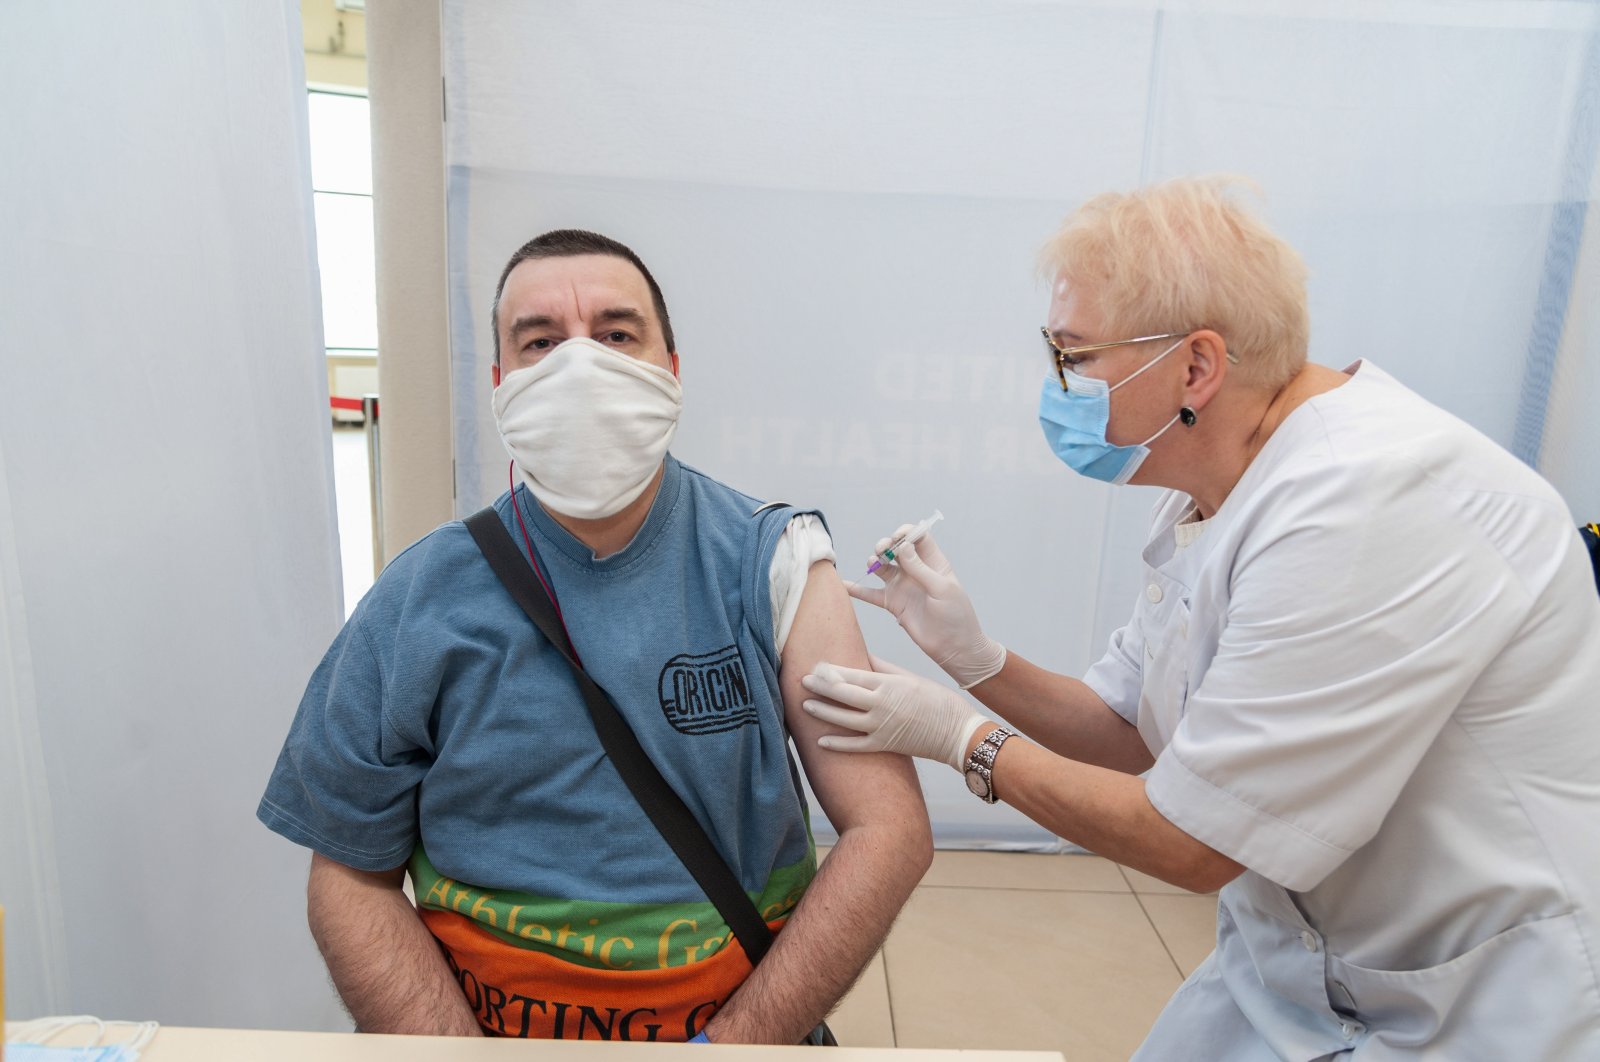 A healthcare worker administers a dose of Sinovac vaccine to a man at the Arena Lviv stadium, in Lviv, Ukraine, May 29, 2021. (Sipa USA via Reuters)